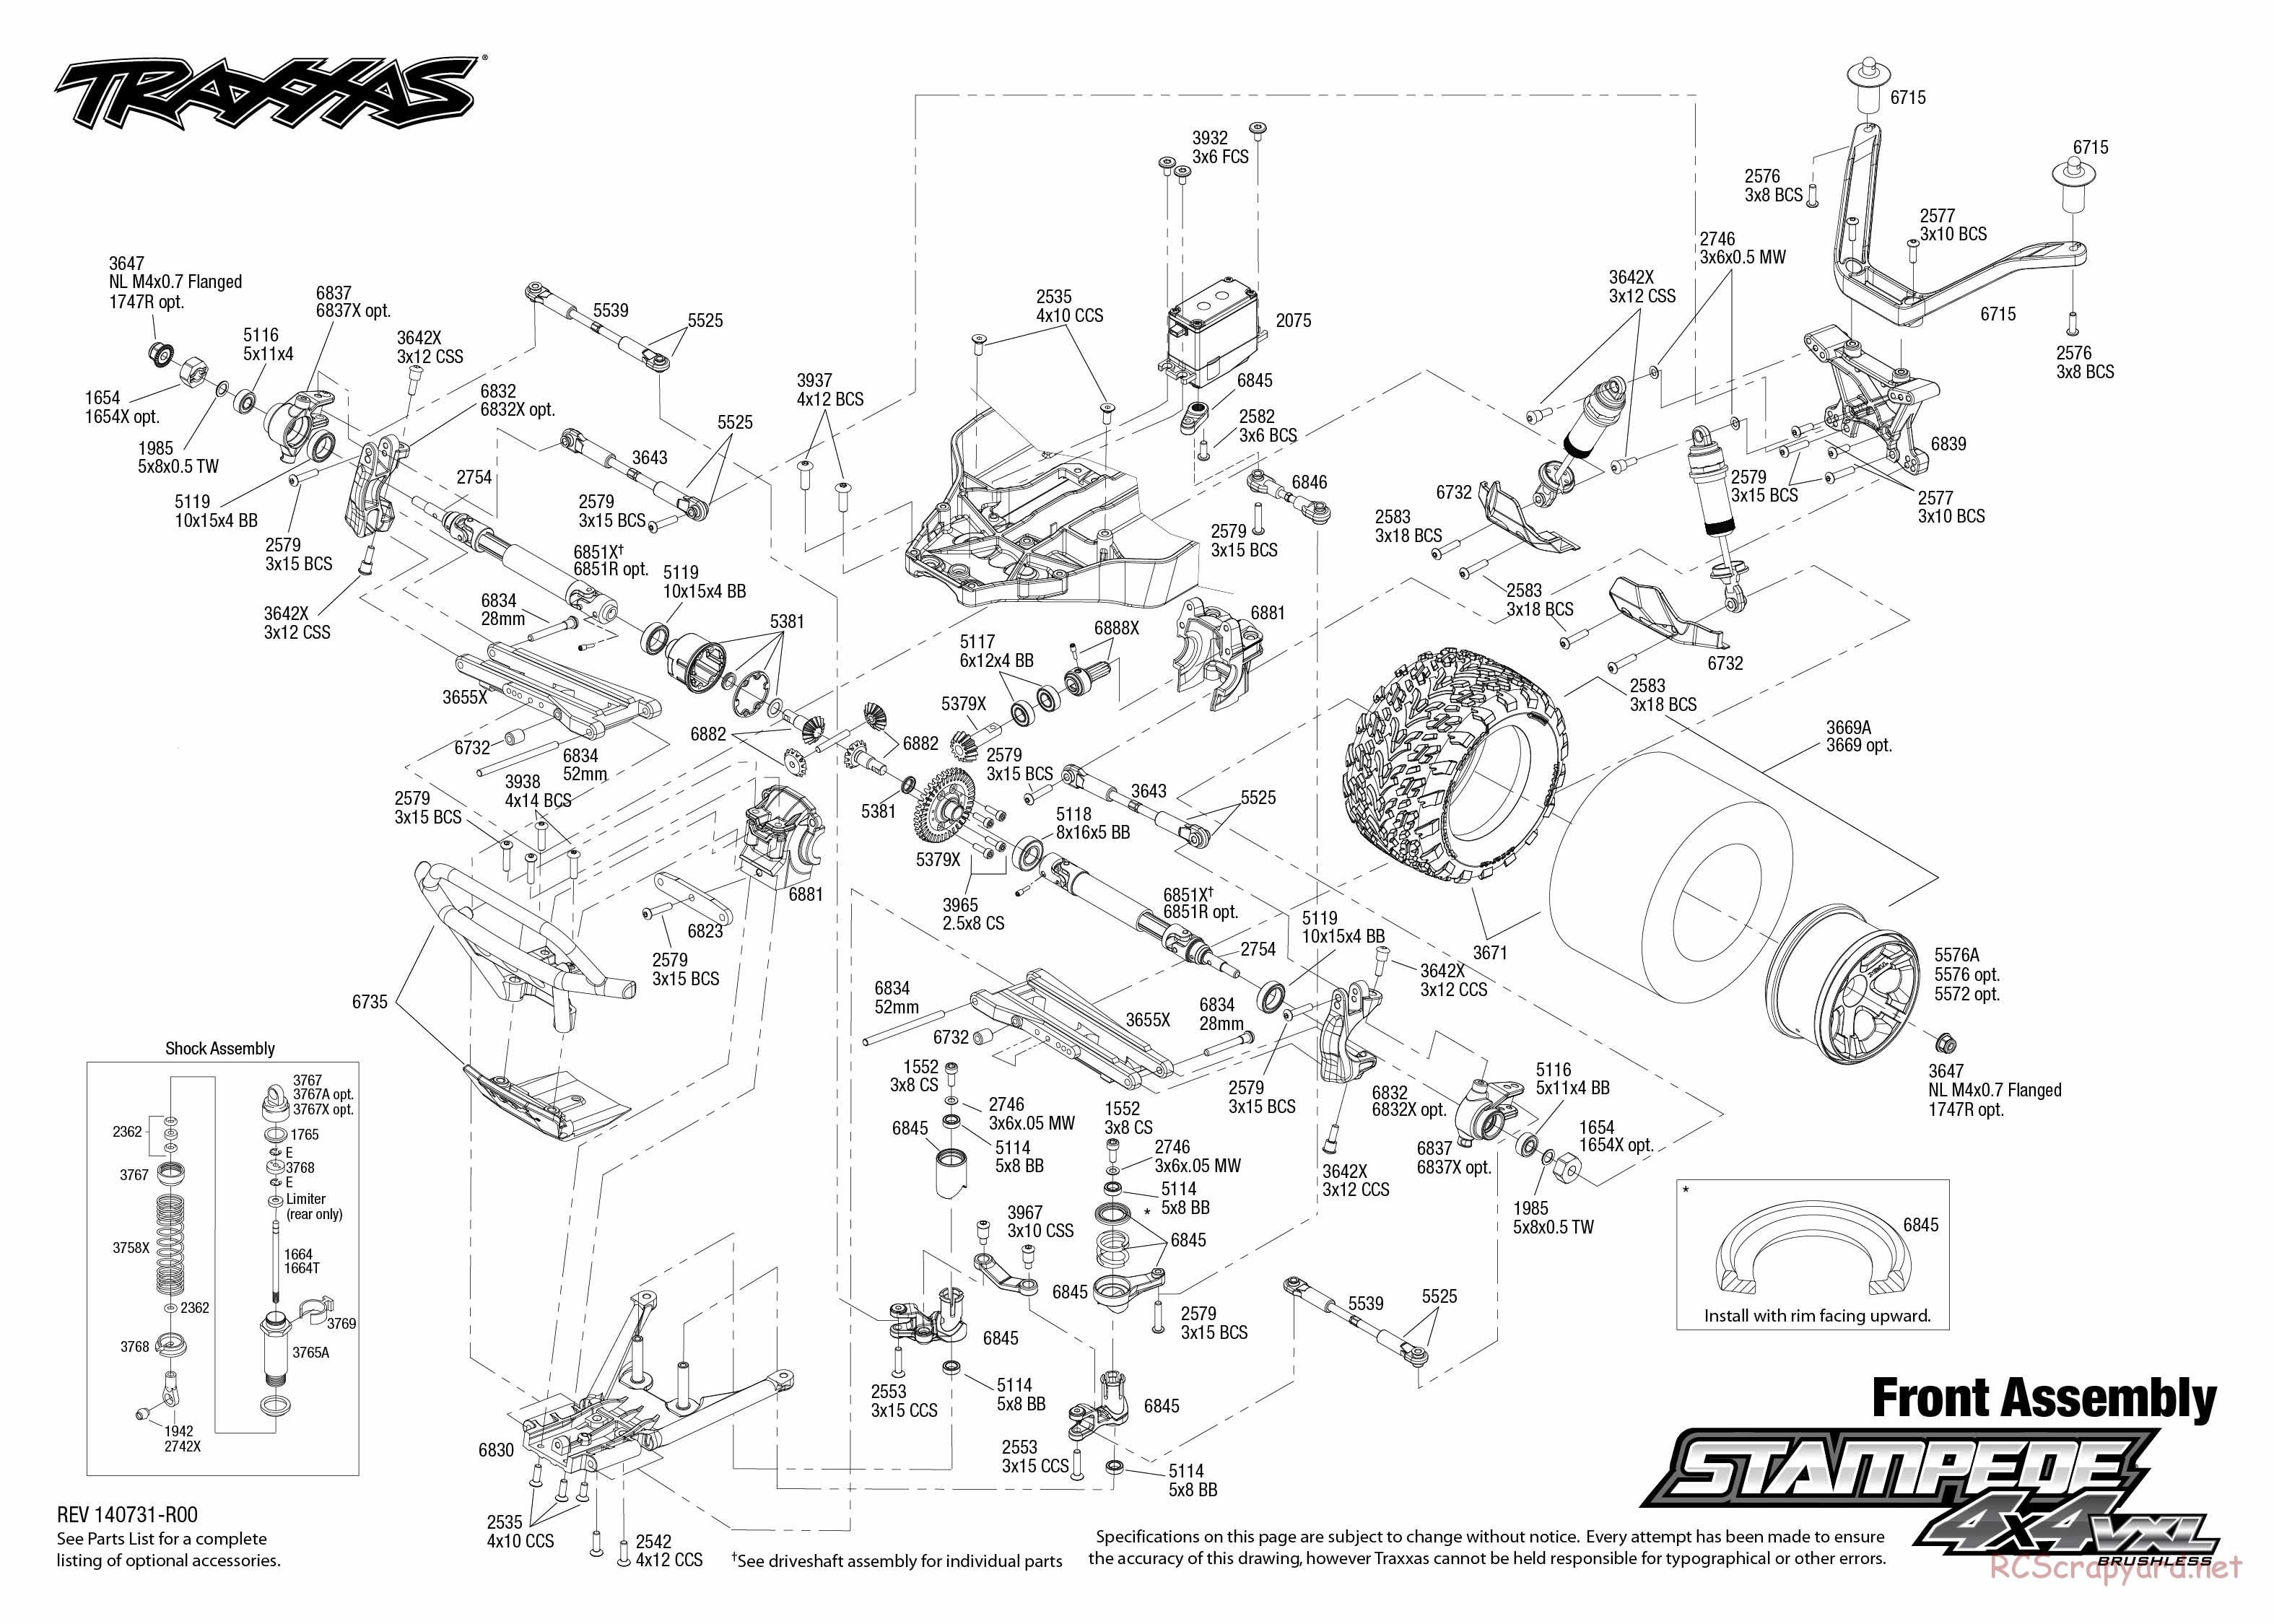 Traxxas - Stampede 4x4 VXL (2015) - Exploded Views - Page 2